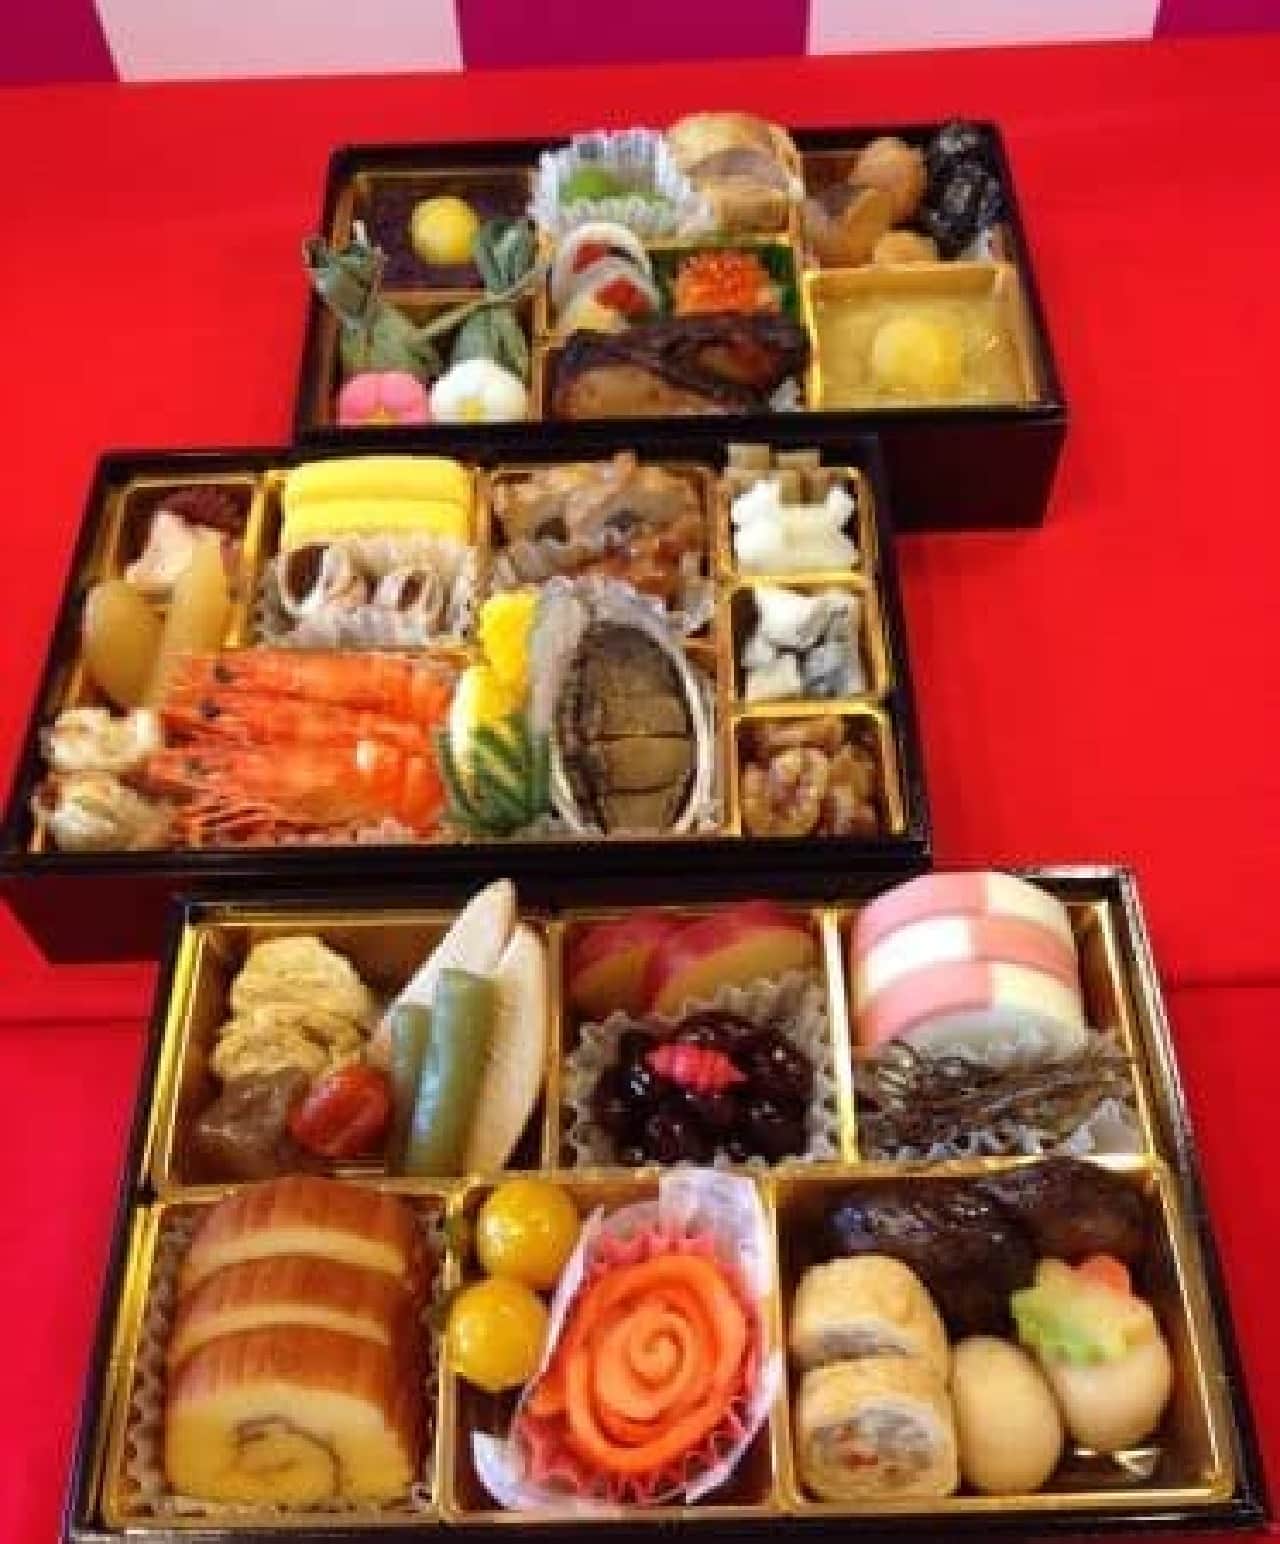 New Year dishes "Topvalu Japanese style Sandanjukei" where you can enjoy 45 items using traditional ingredients